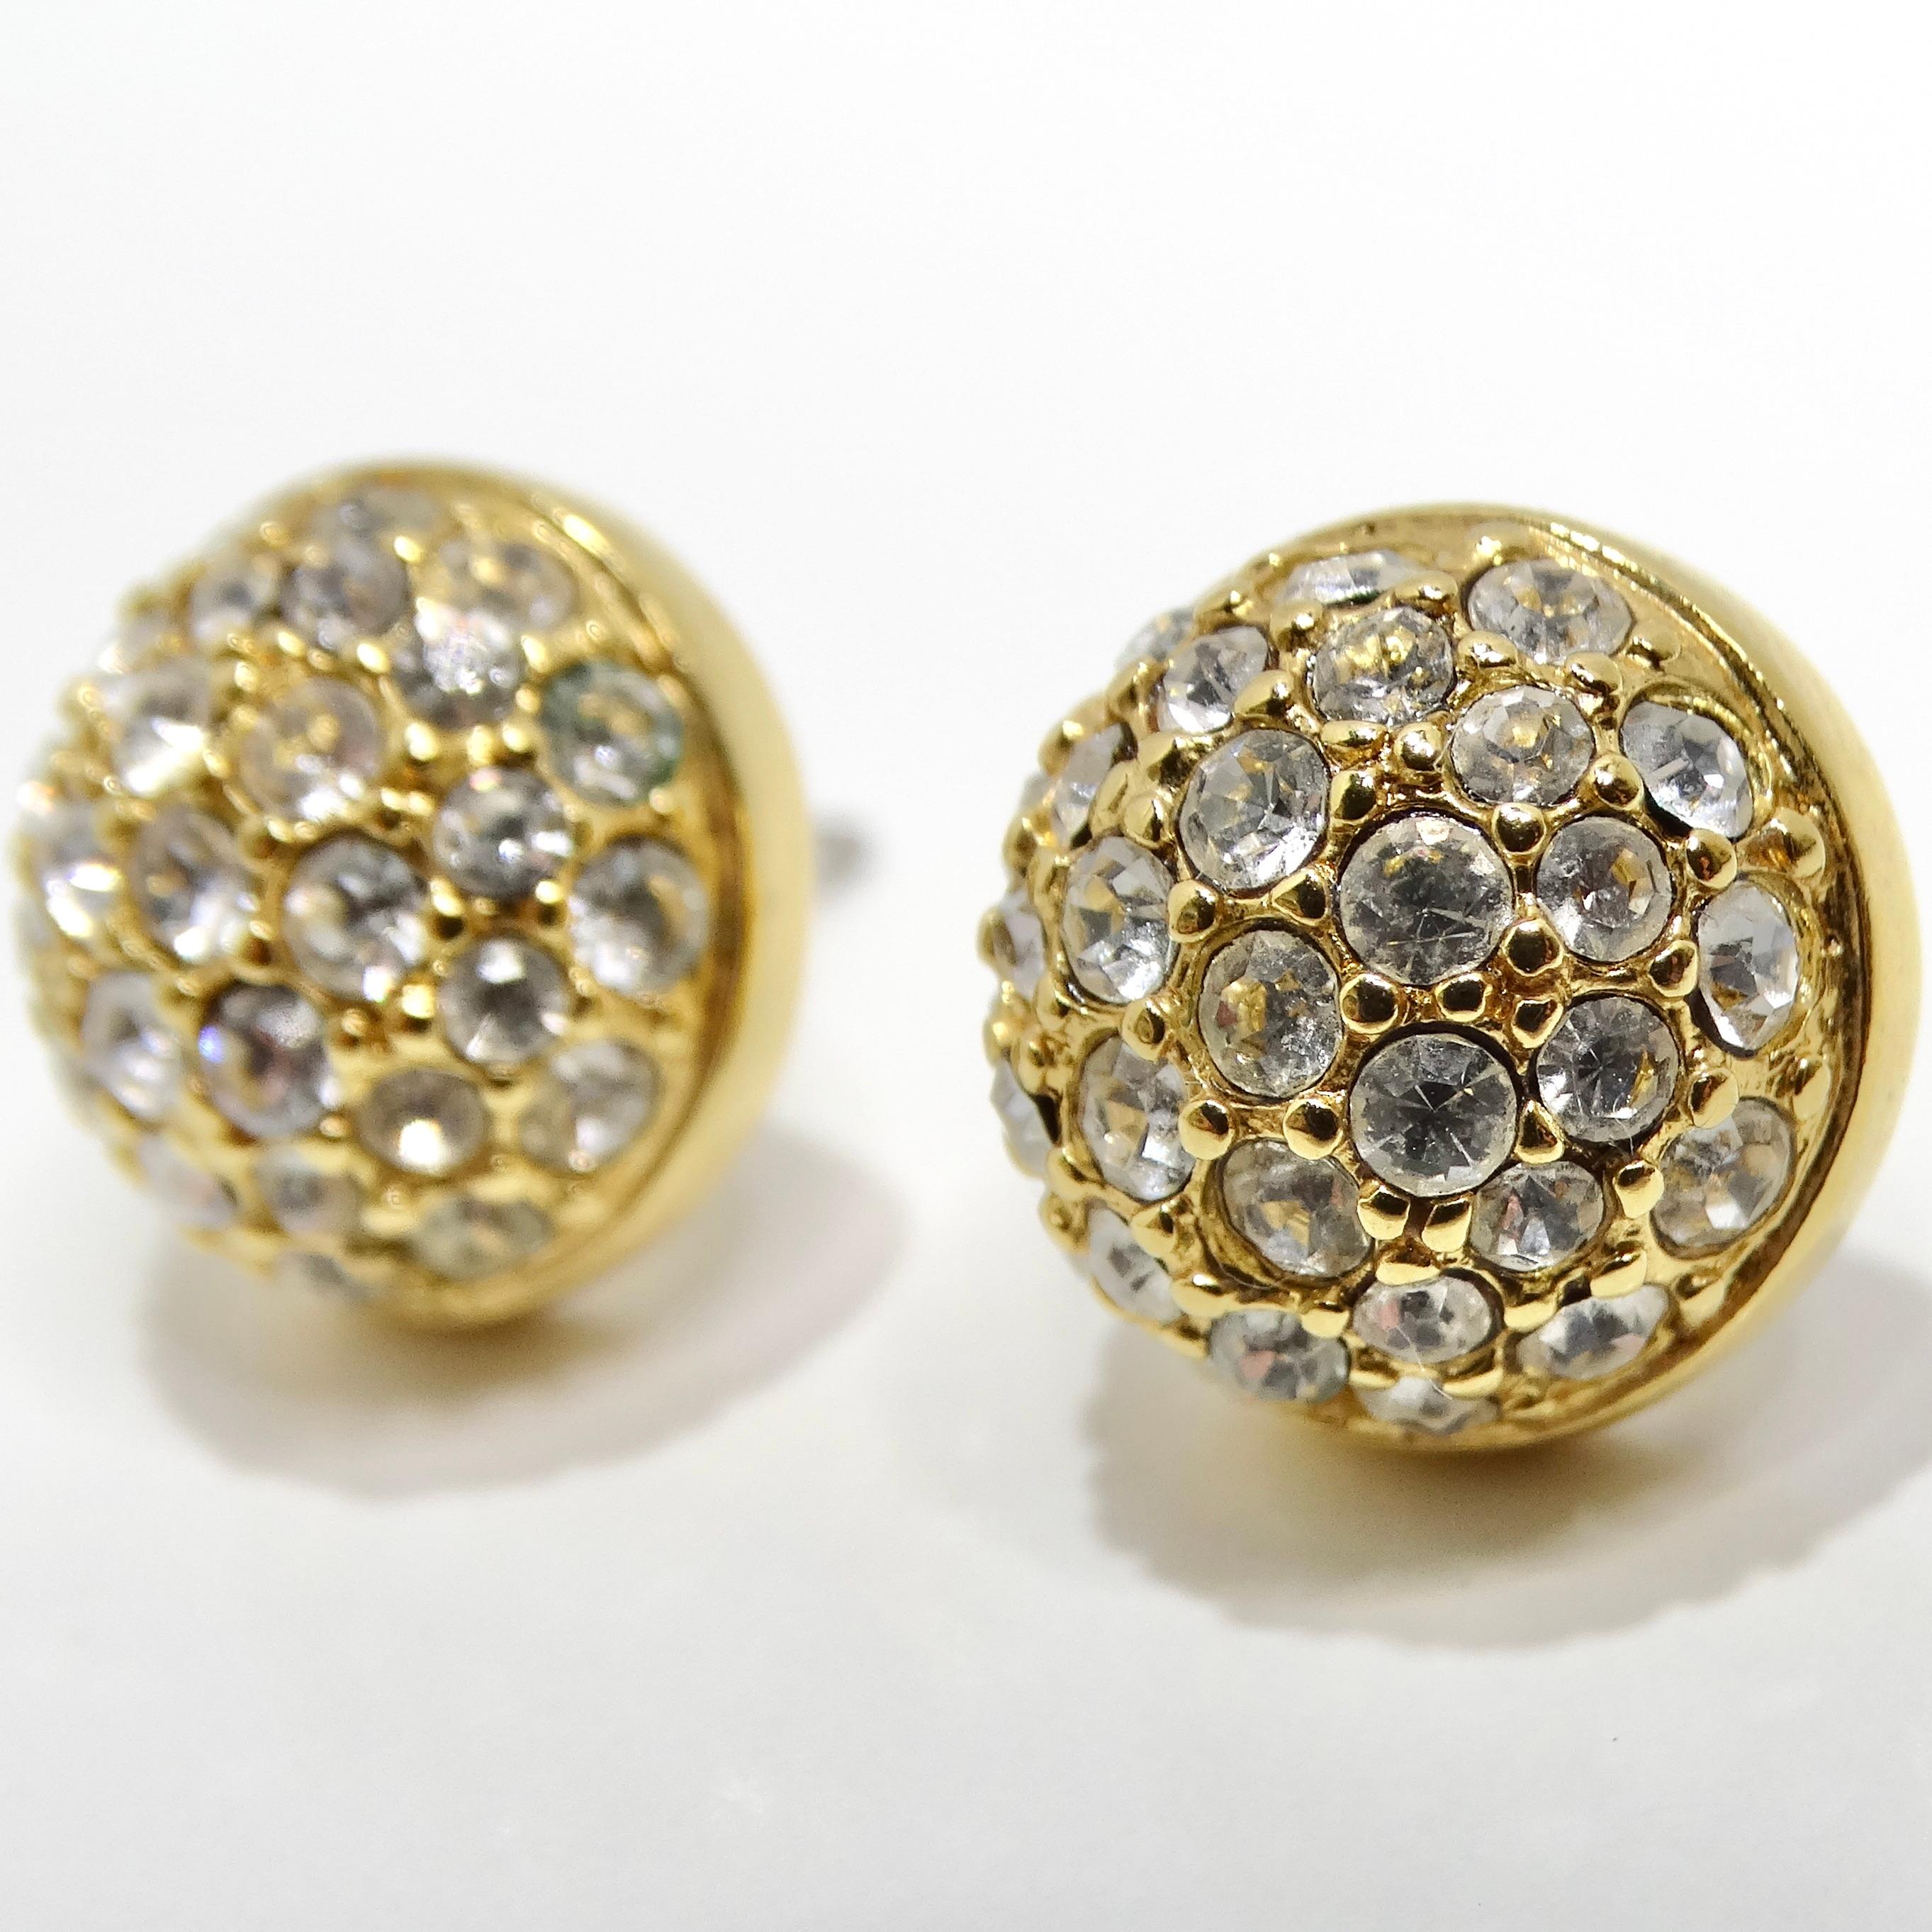 Add a touch of glamour to your ensemble with the Swarovski Vintage 18K Gold Plated Rhinestone Stud Earrings. These exquisite stud earrings from the 1990s feature a timeless ball-shaped design, adorned with clear Swarovski rhinestones that catch the